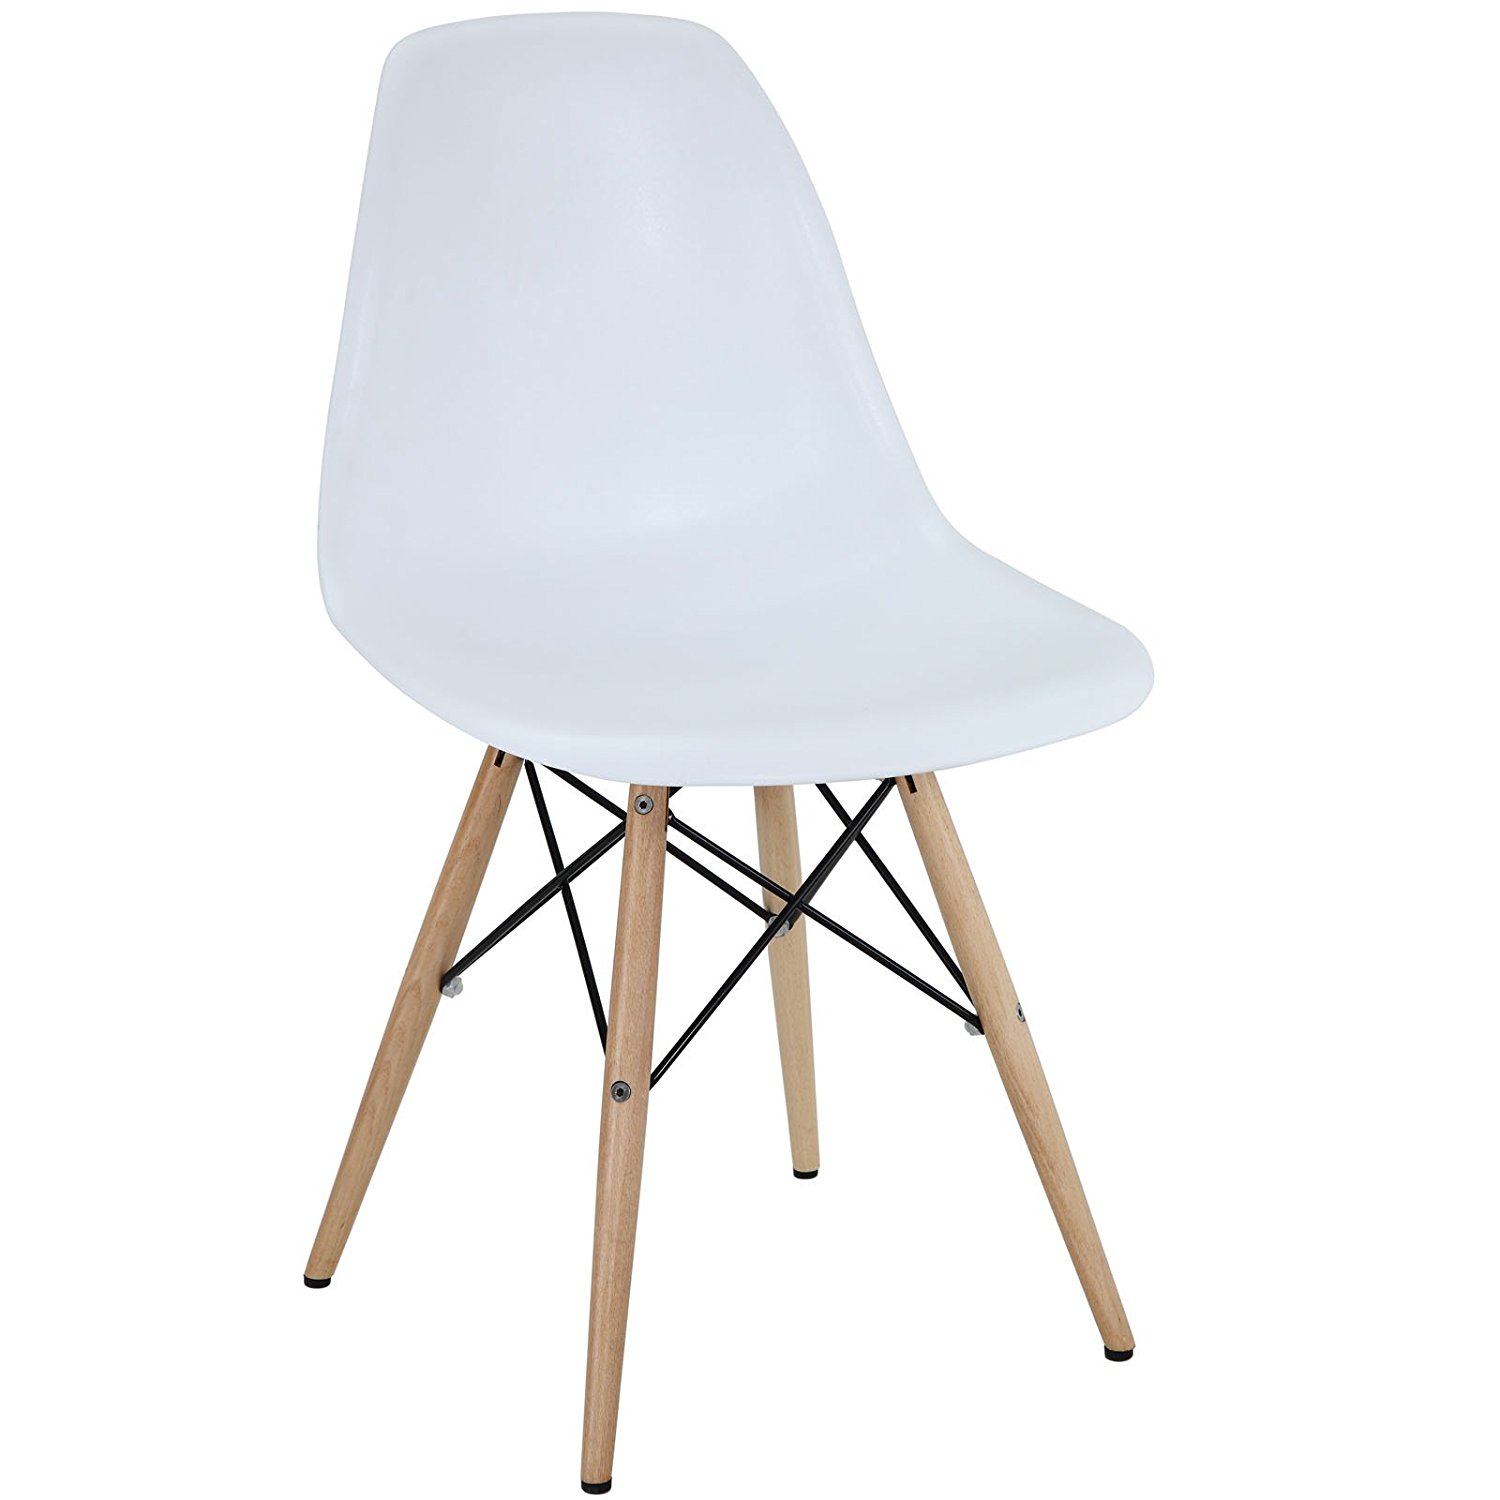 Modway Plastic Side Chair in White with Wooden Base - Plastic Chair